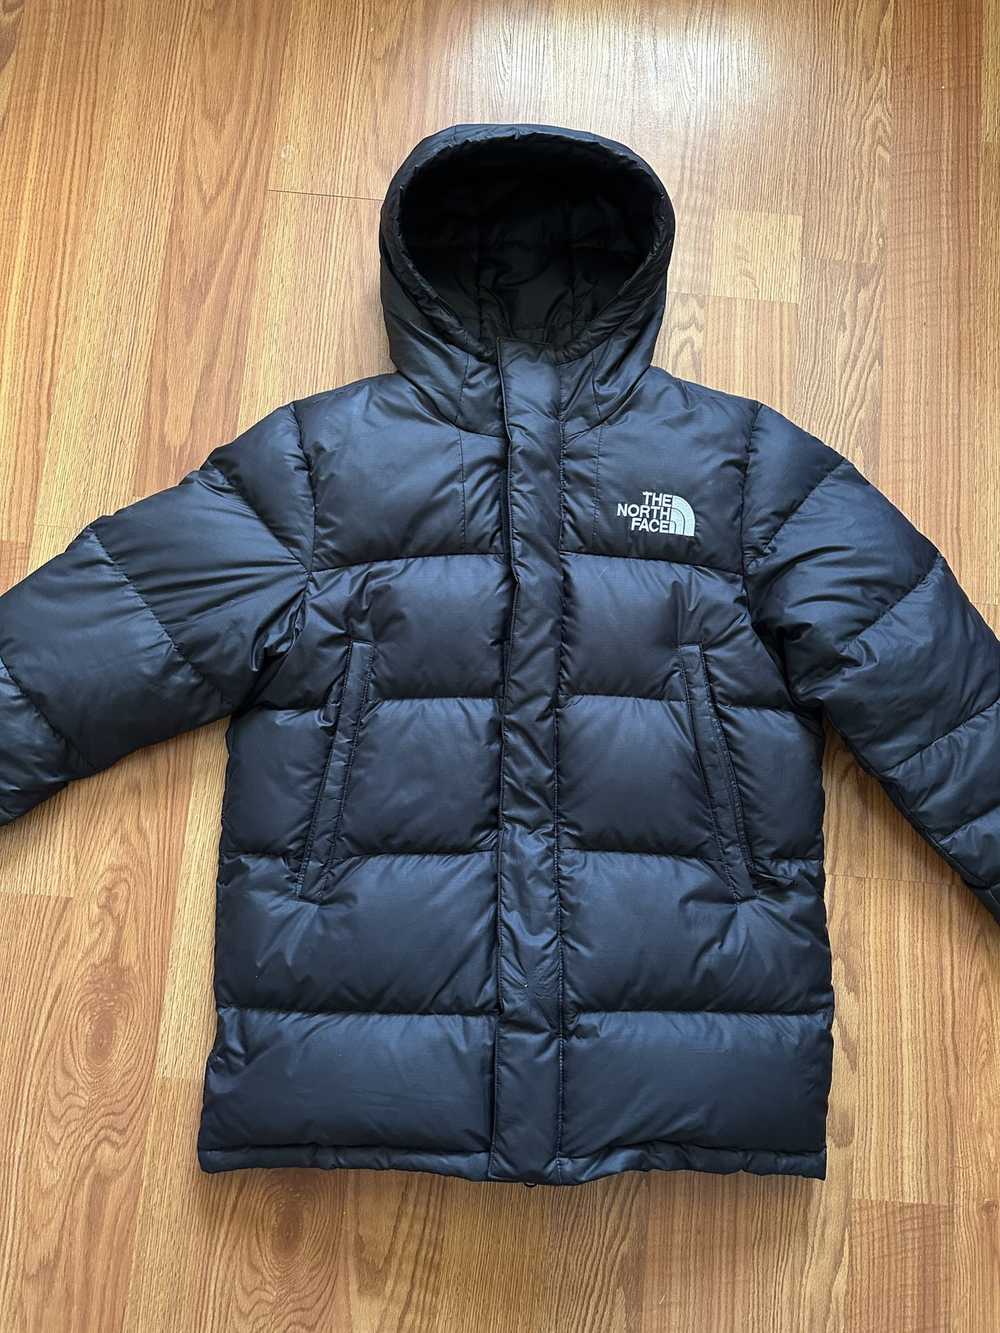 The North Face The North Face Himalayan Parka - image 1